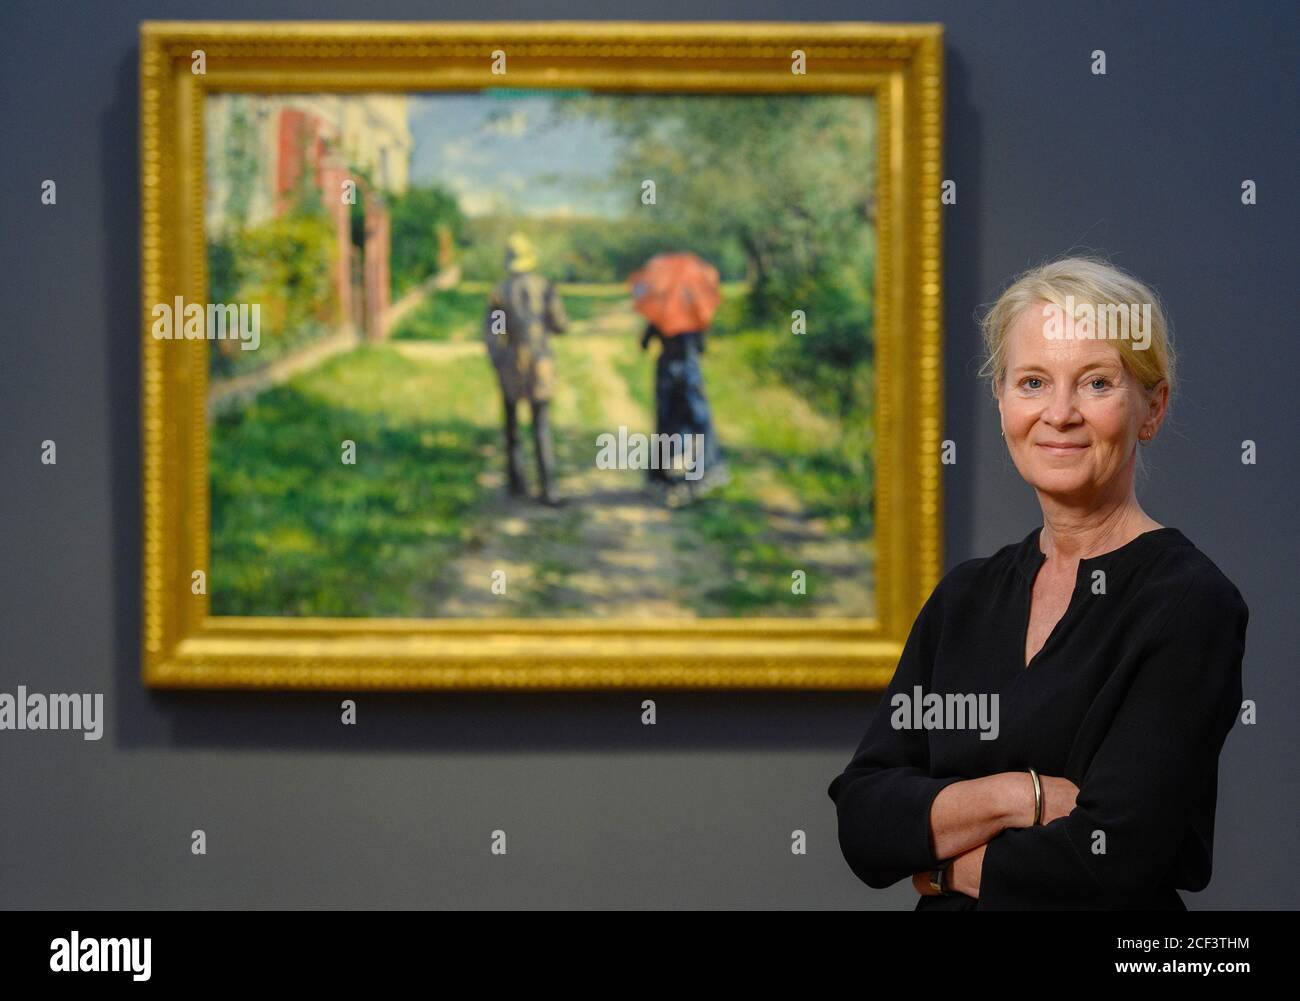 Potsdam, Germany. 03rd Sep, 2020. Museum director Ortrud Westheider is standing after the press conference for the opening of the new exhibition 'Impressionism. The Hasso Plattner Collection' in the Barberini Museum in front of the painting 'Couple on a Walk' (1881) by Gustave Caillebotte. From 5 September 2020, Potsdam will permanently exhibit around 100 works by Impressionist and post-Impressionist painters, including 34 paintings by Claude Monet. The paintings are on permanent loan to the museum from the museum founder Plattner. Credit: Soeren Stache/dpa-Zentralbild/ZB/dpa/Alamy Live News Stock Photo